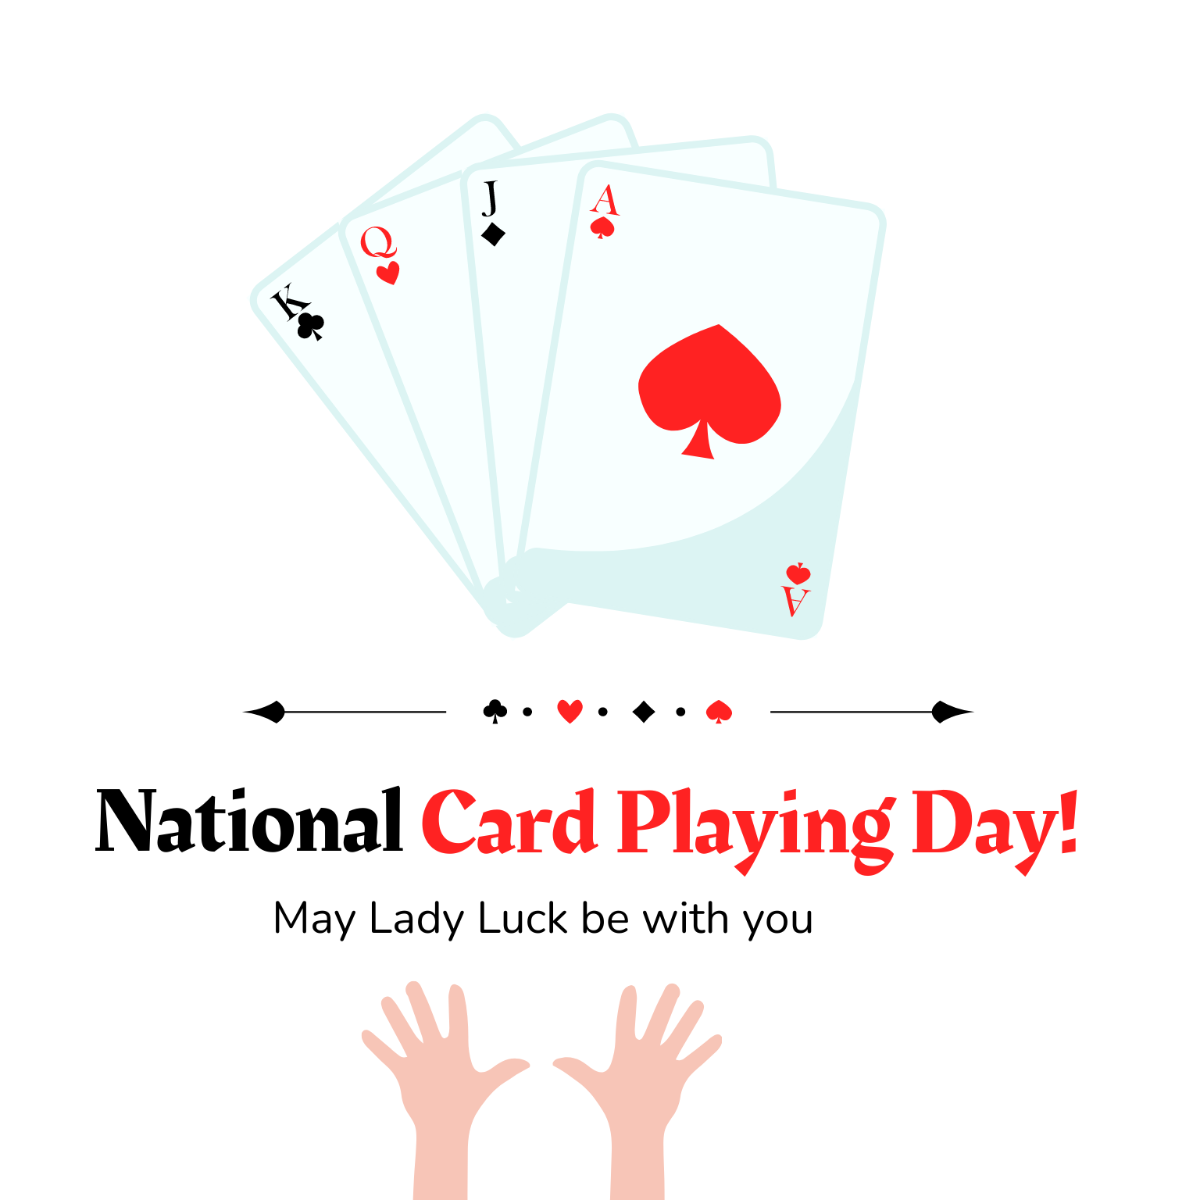 National Card Playing Day Wishes Vector